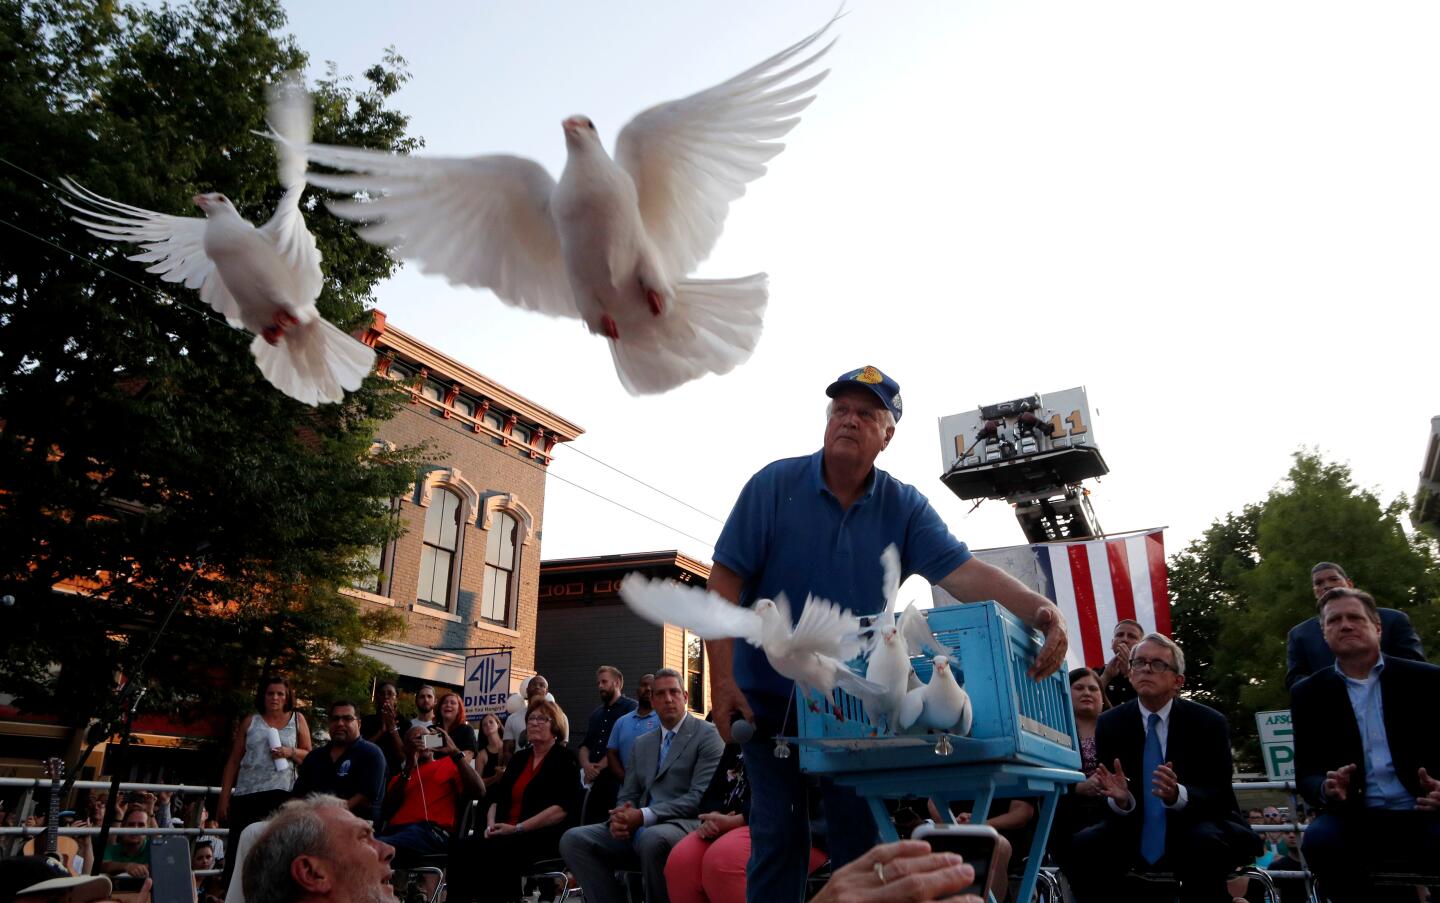 Doves are released during a vigil for victims of a shooting in the Oregon District of Dayton, Ohio.